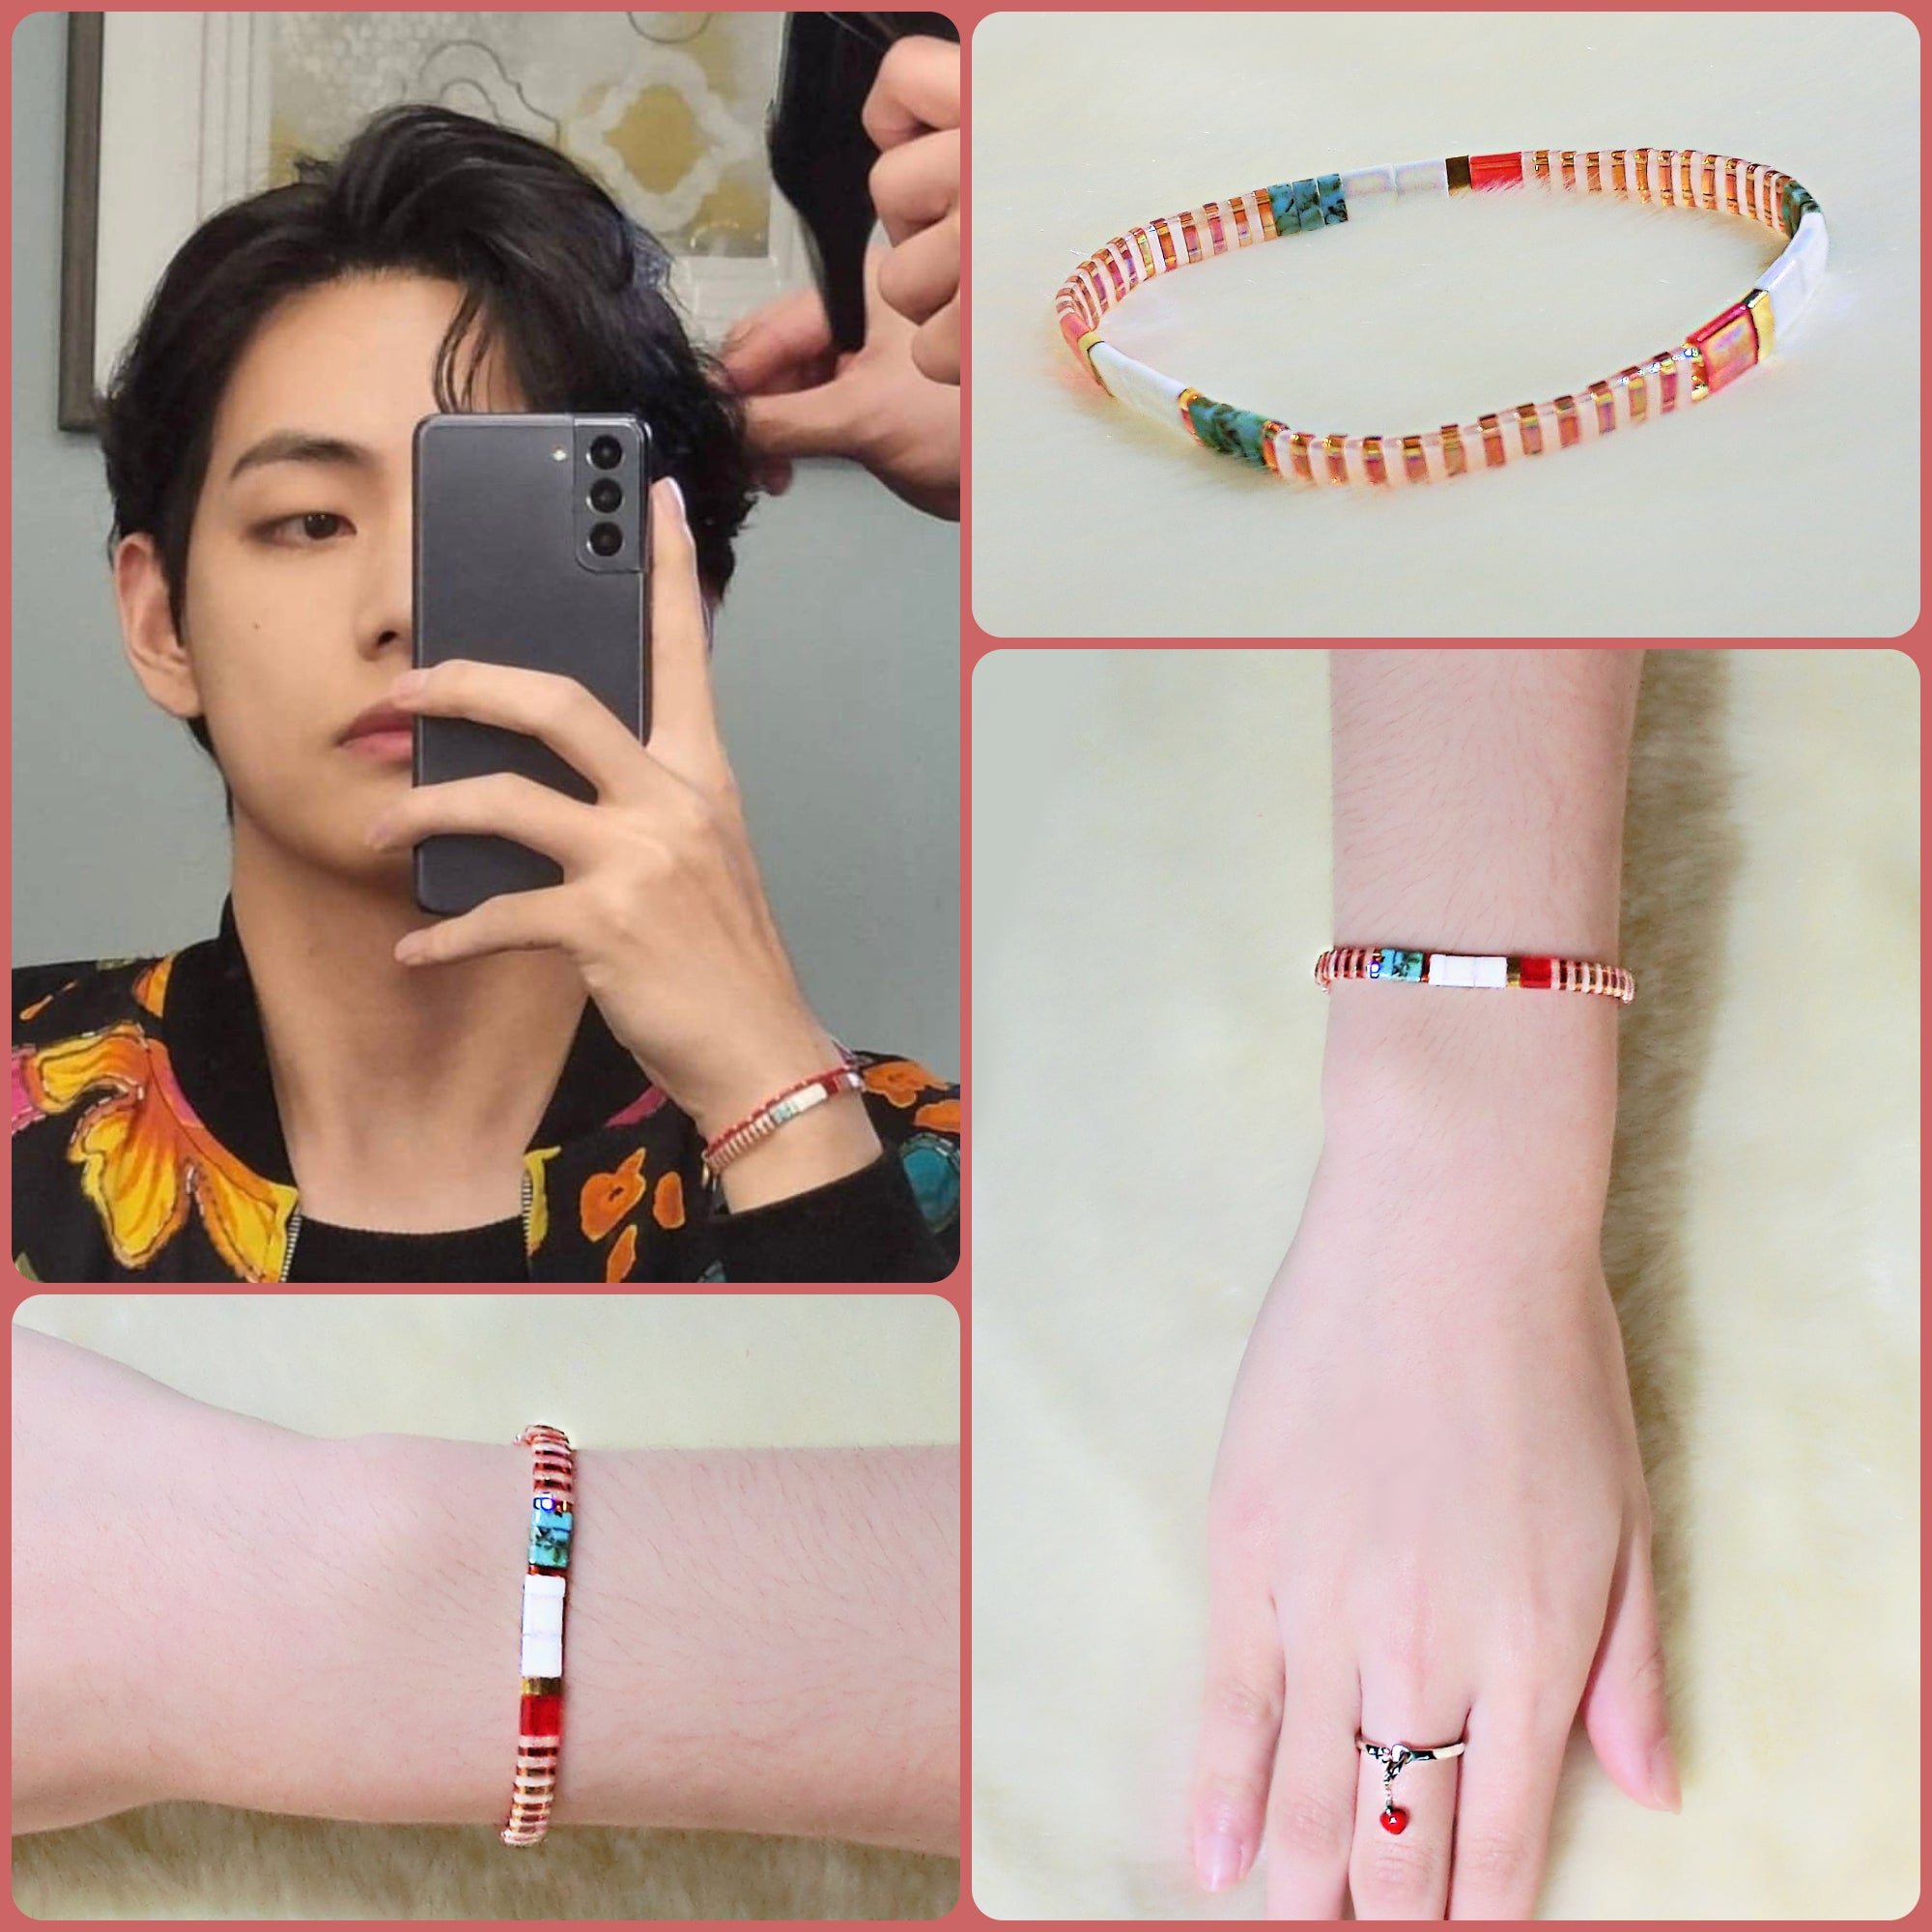 Best Trade in Prices YESASIA: BTS : V Style - Orior Bracelet (Silver)  PHOTO/POSTER,Celebrity Gifts,MALE STARS,GROUPS,GIFTS - BTS, Asmama - Korean  Collectibles - Free Shipping - North America Site, v bracelet bts